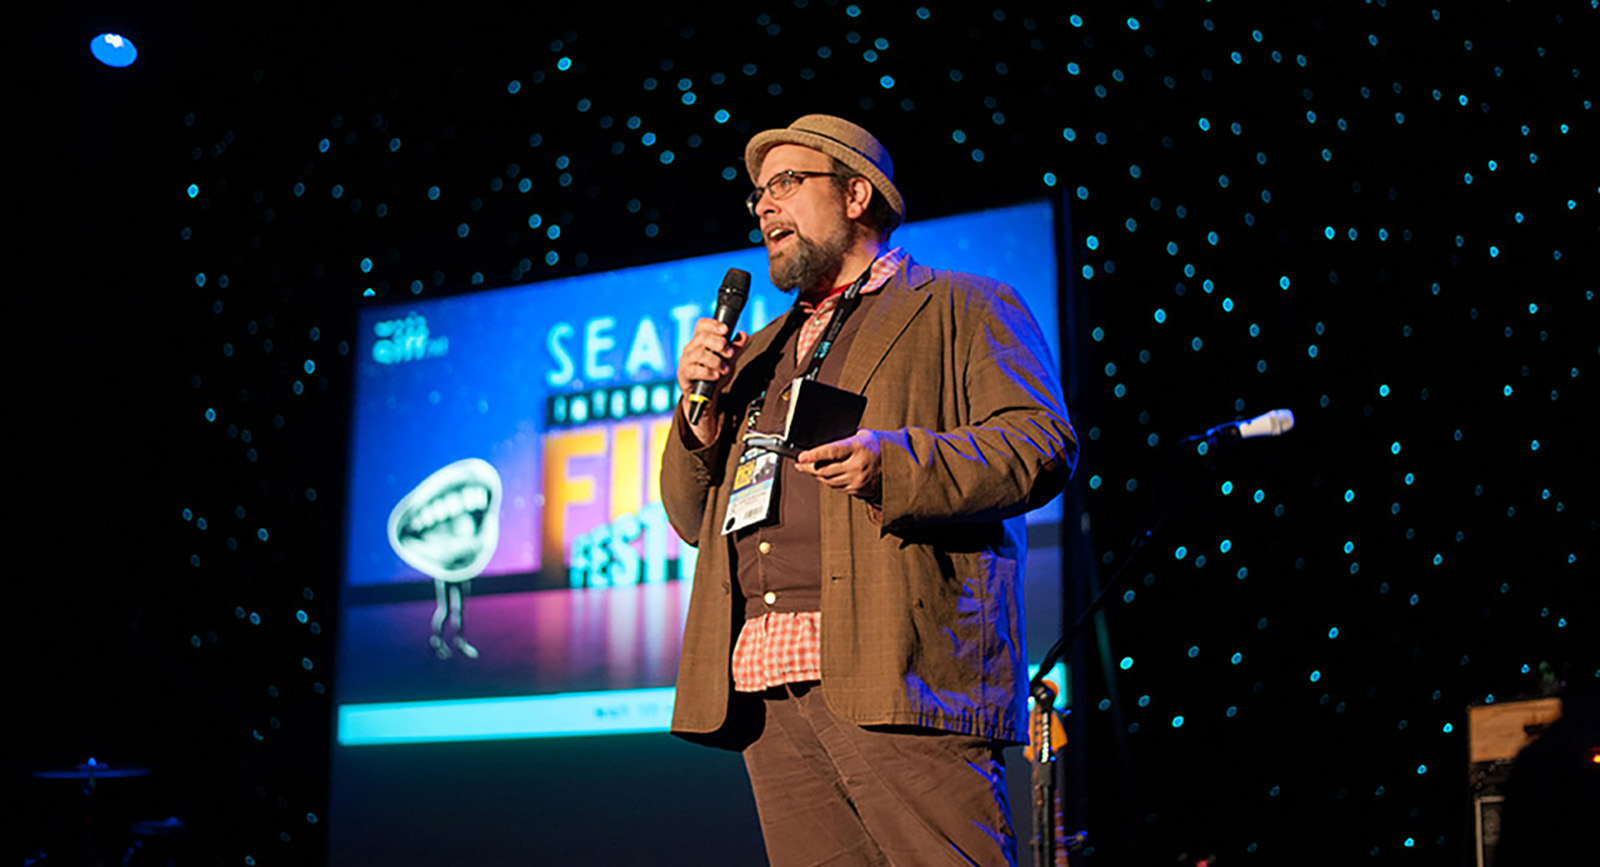 SIFF programmer, Clinton McClung, intoducing a film during the 44th Seattle International Film Festival